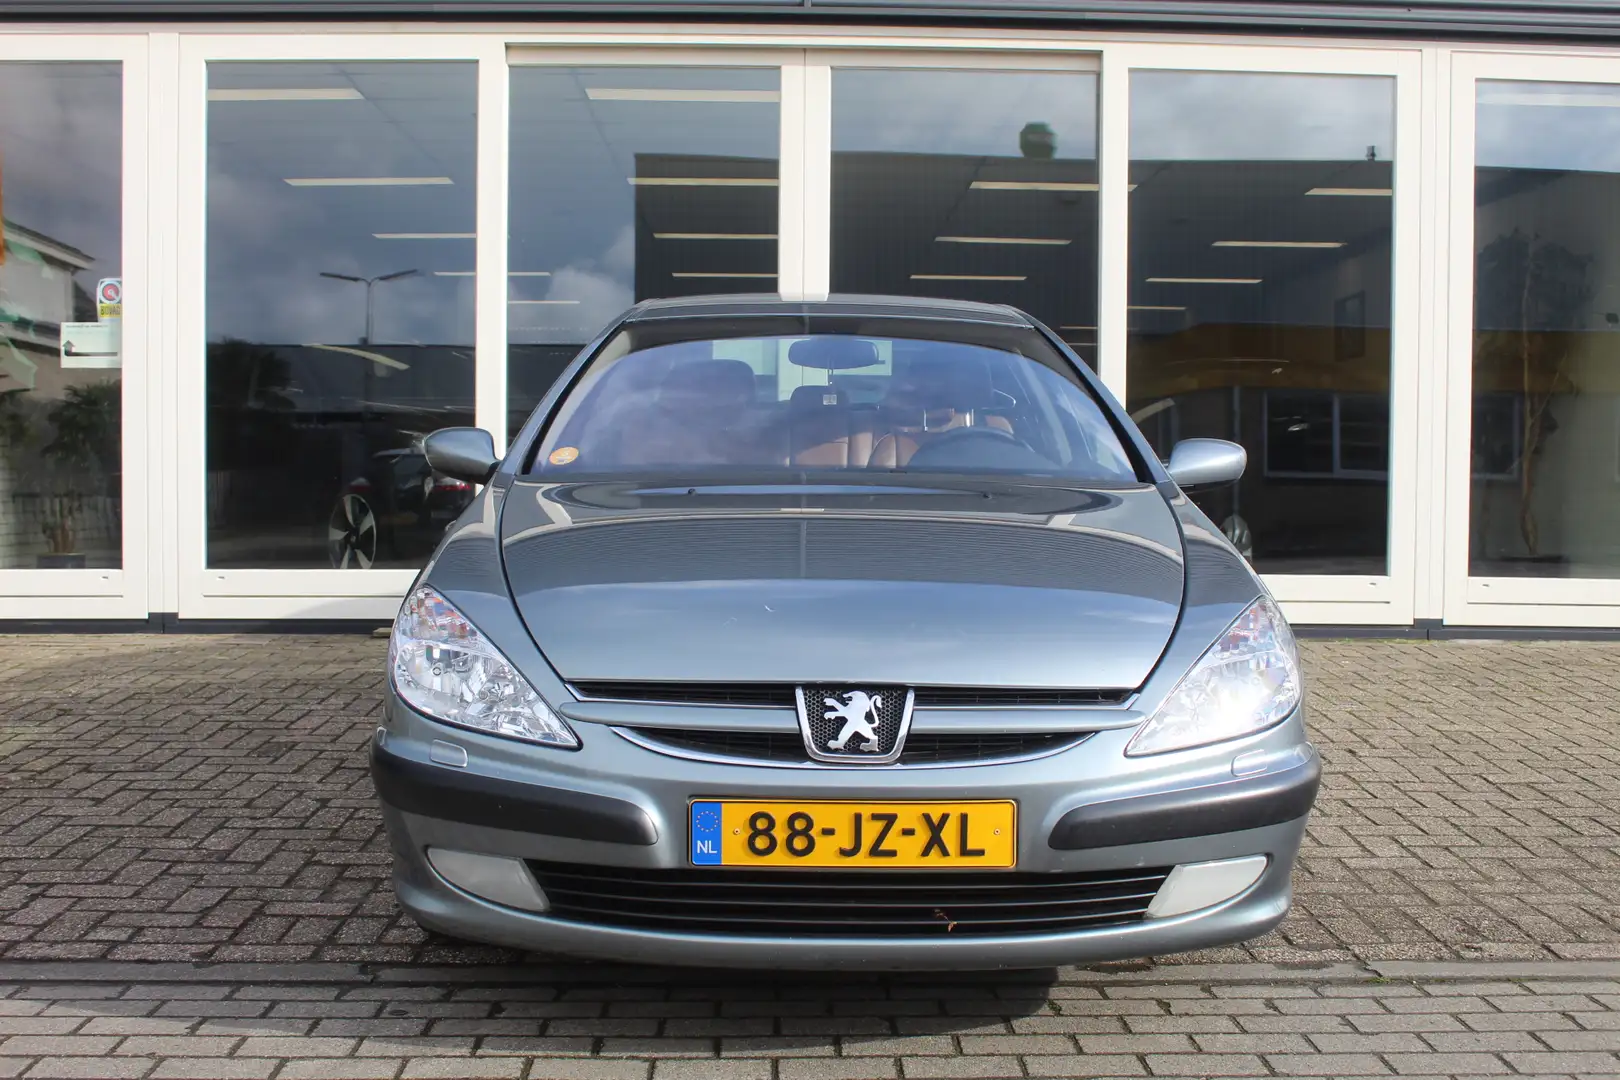 Peugeot 607 2.2-16V Executive, Automaat, Climate Control, PDC siva - 2